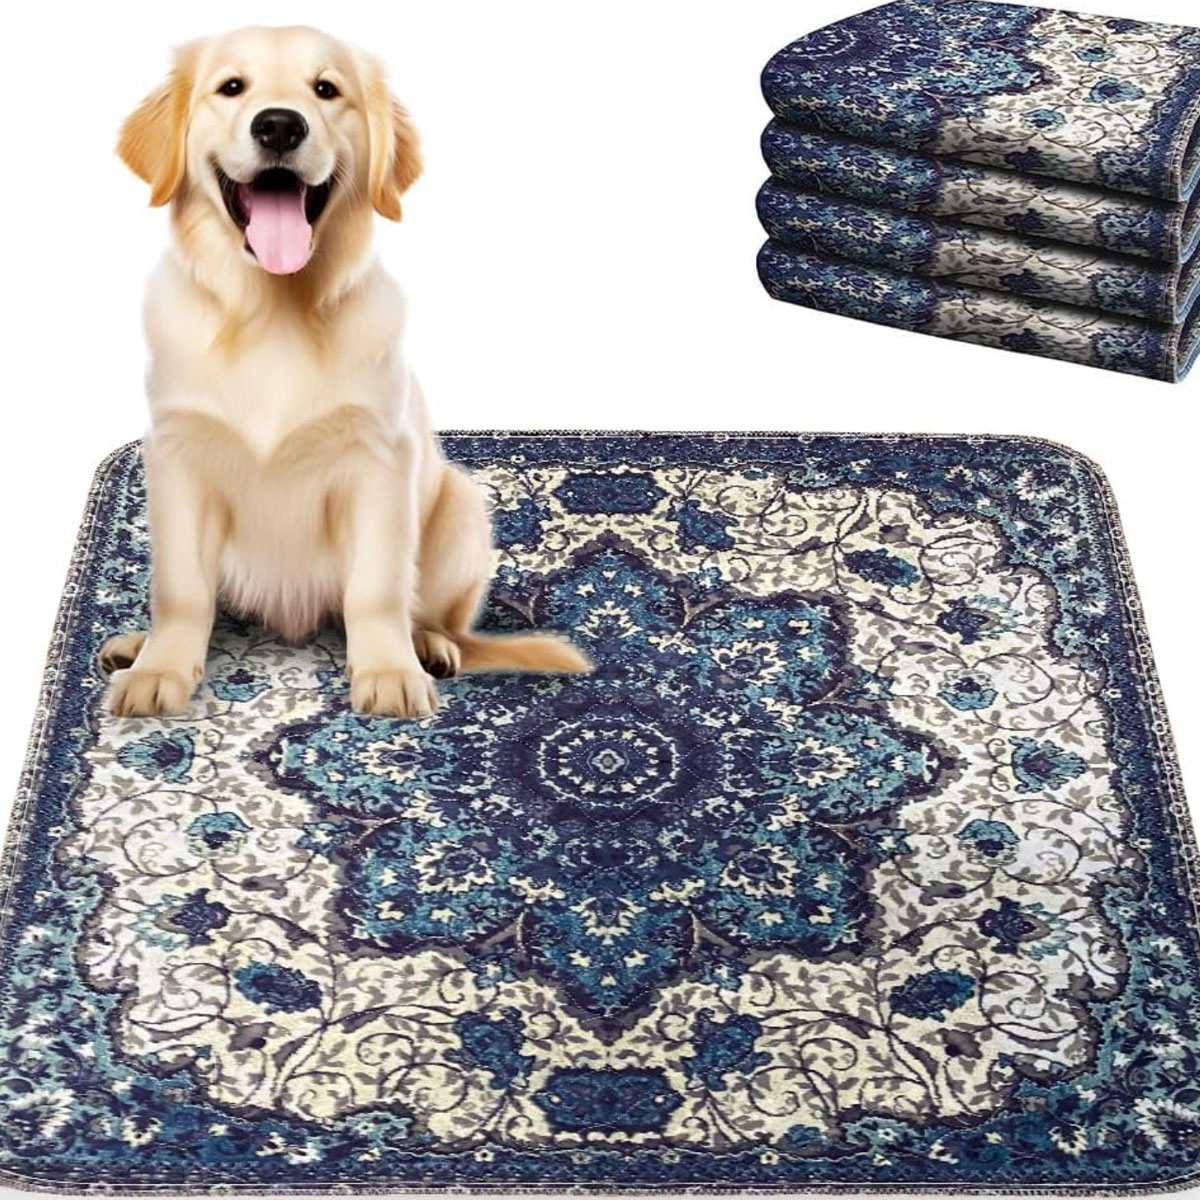 https://akns-images.eonline.com/eol_images/Entire_Site/2023626/rs_1200x1200-230726140815-dog-rug1200-.jpg?fit=around%7C1080:540&output-quality=90&crop=1080:540;center,top